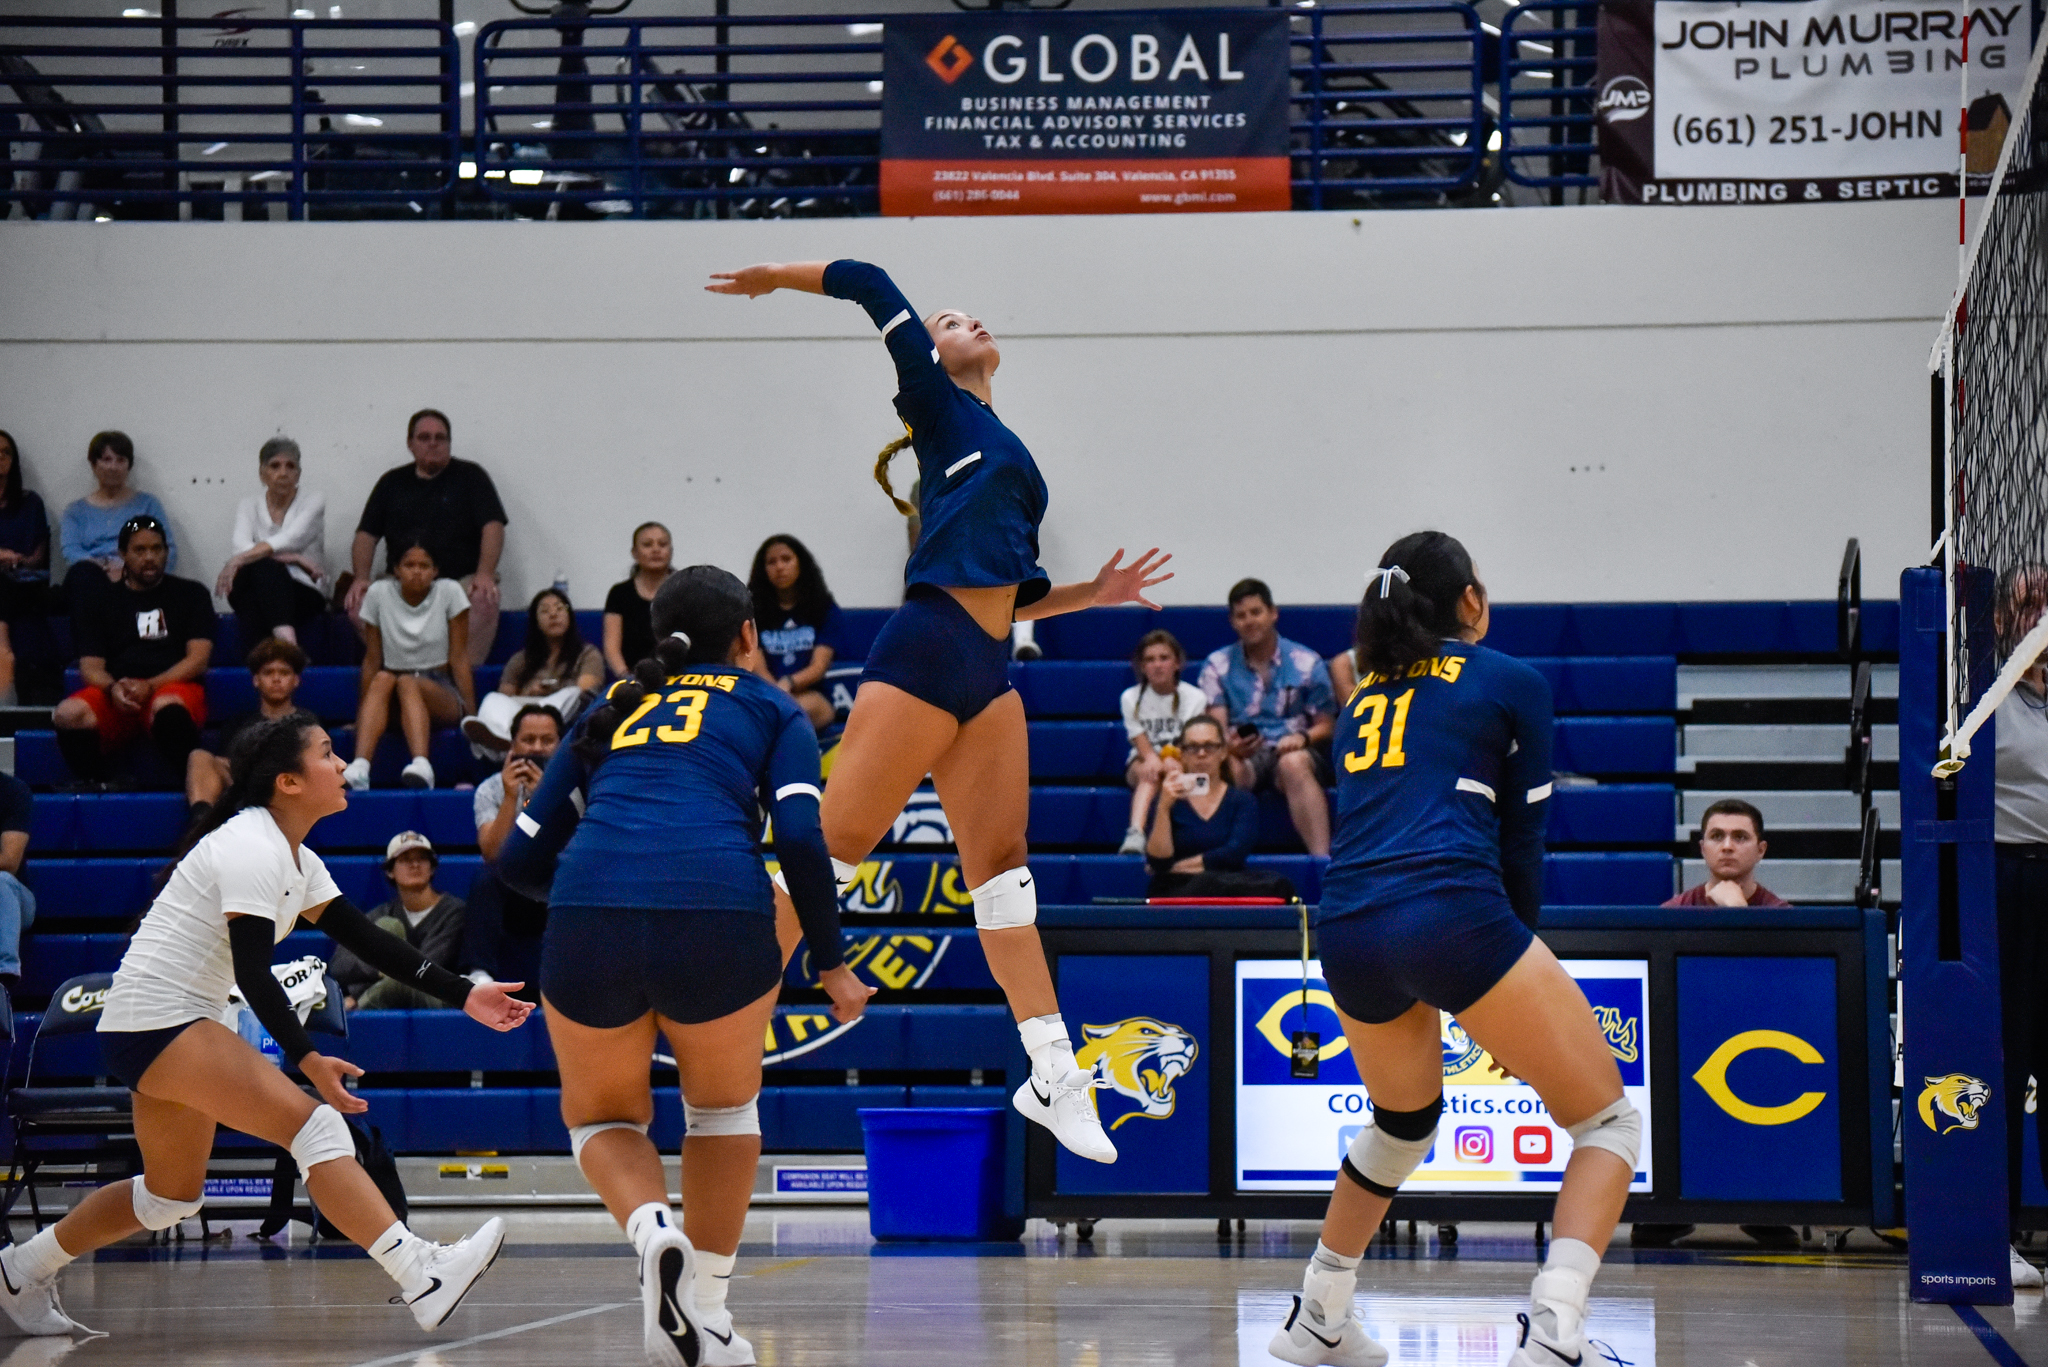 Stock action image of College of the Canyons women's volleyball.